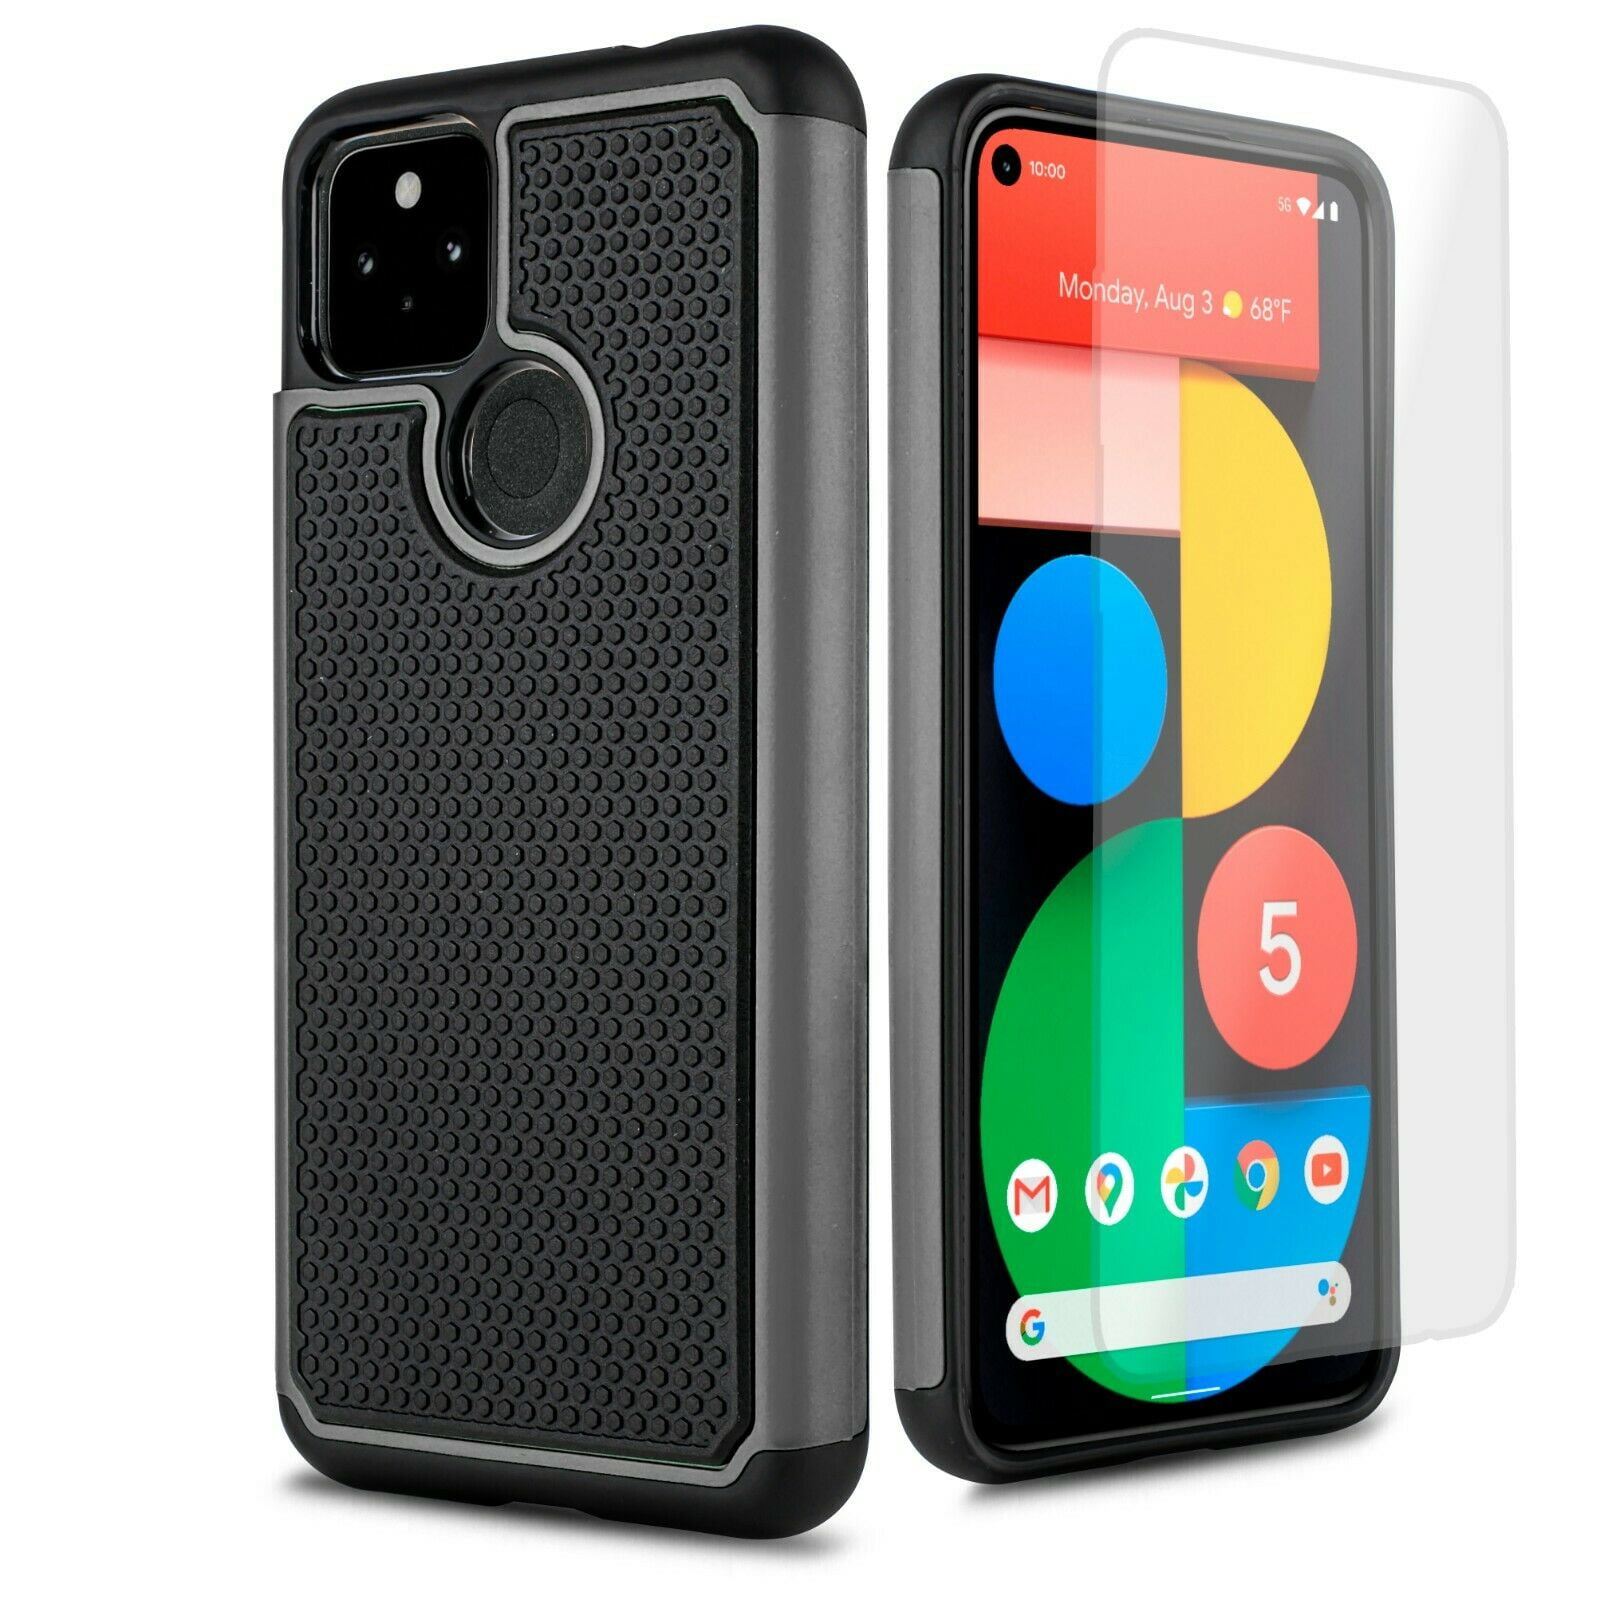 for Google Pixel 5A 5G (NOT FIT PIXEL 5) with Tempered Glass Phone Case  Shockproof Edges Hybrid Hard Back Slim Bumper Cover 